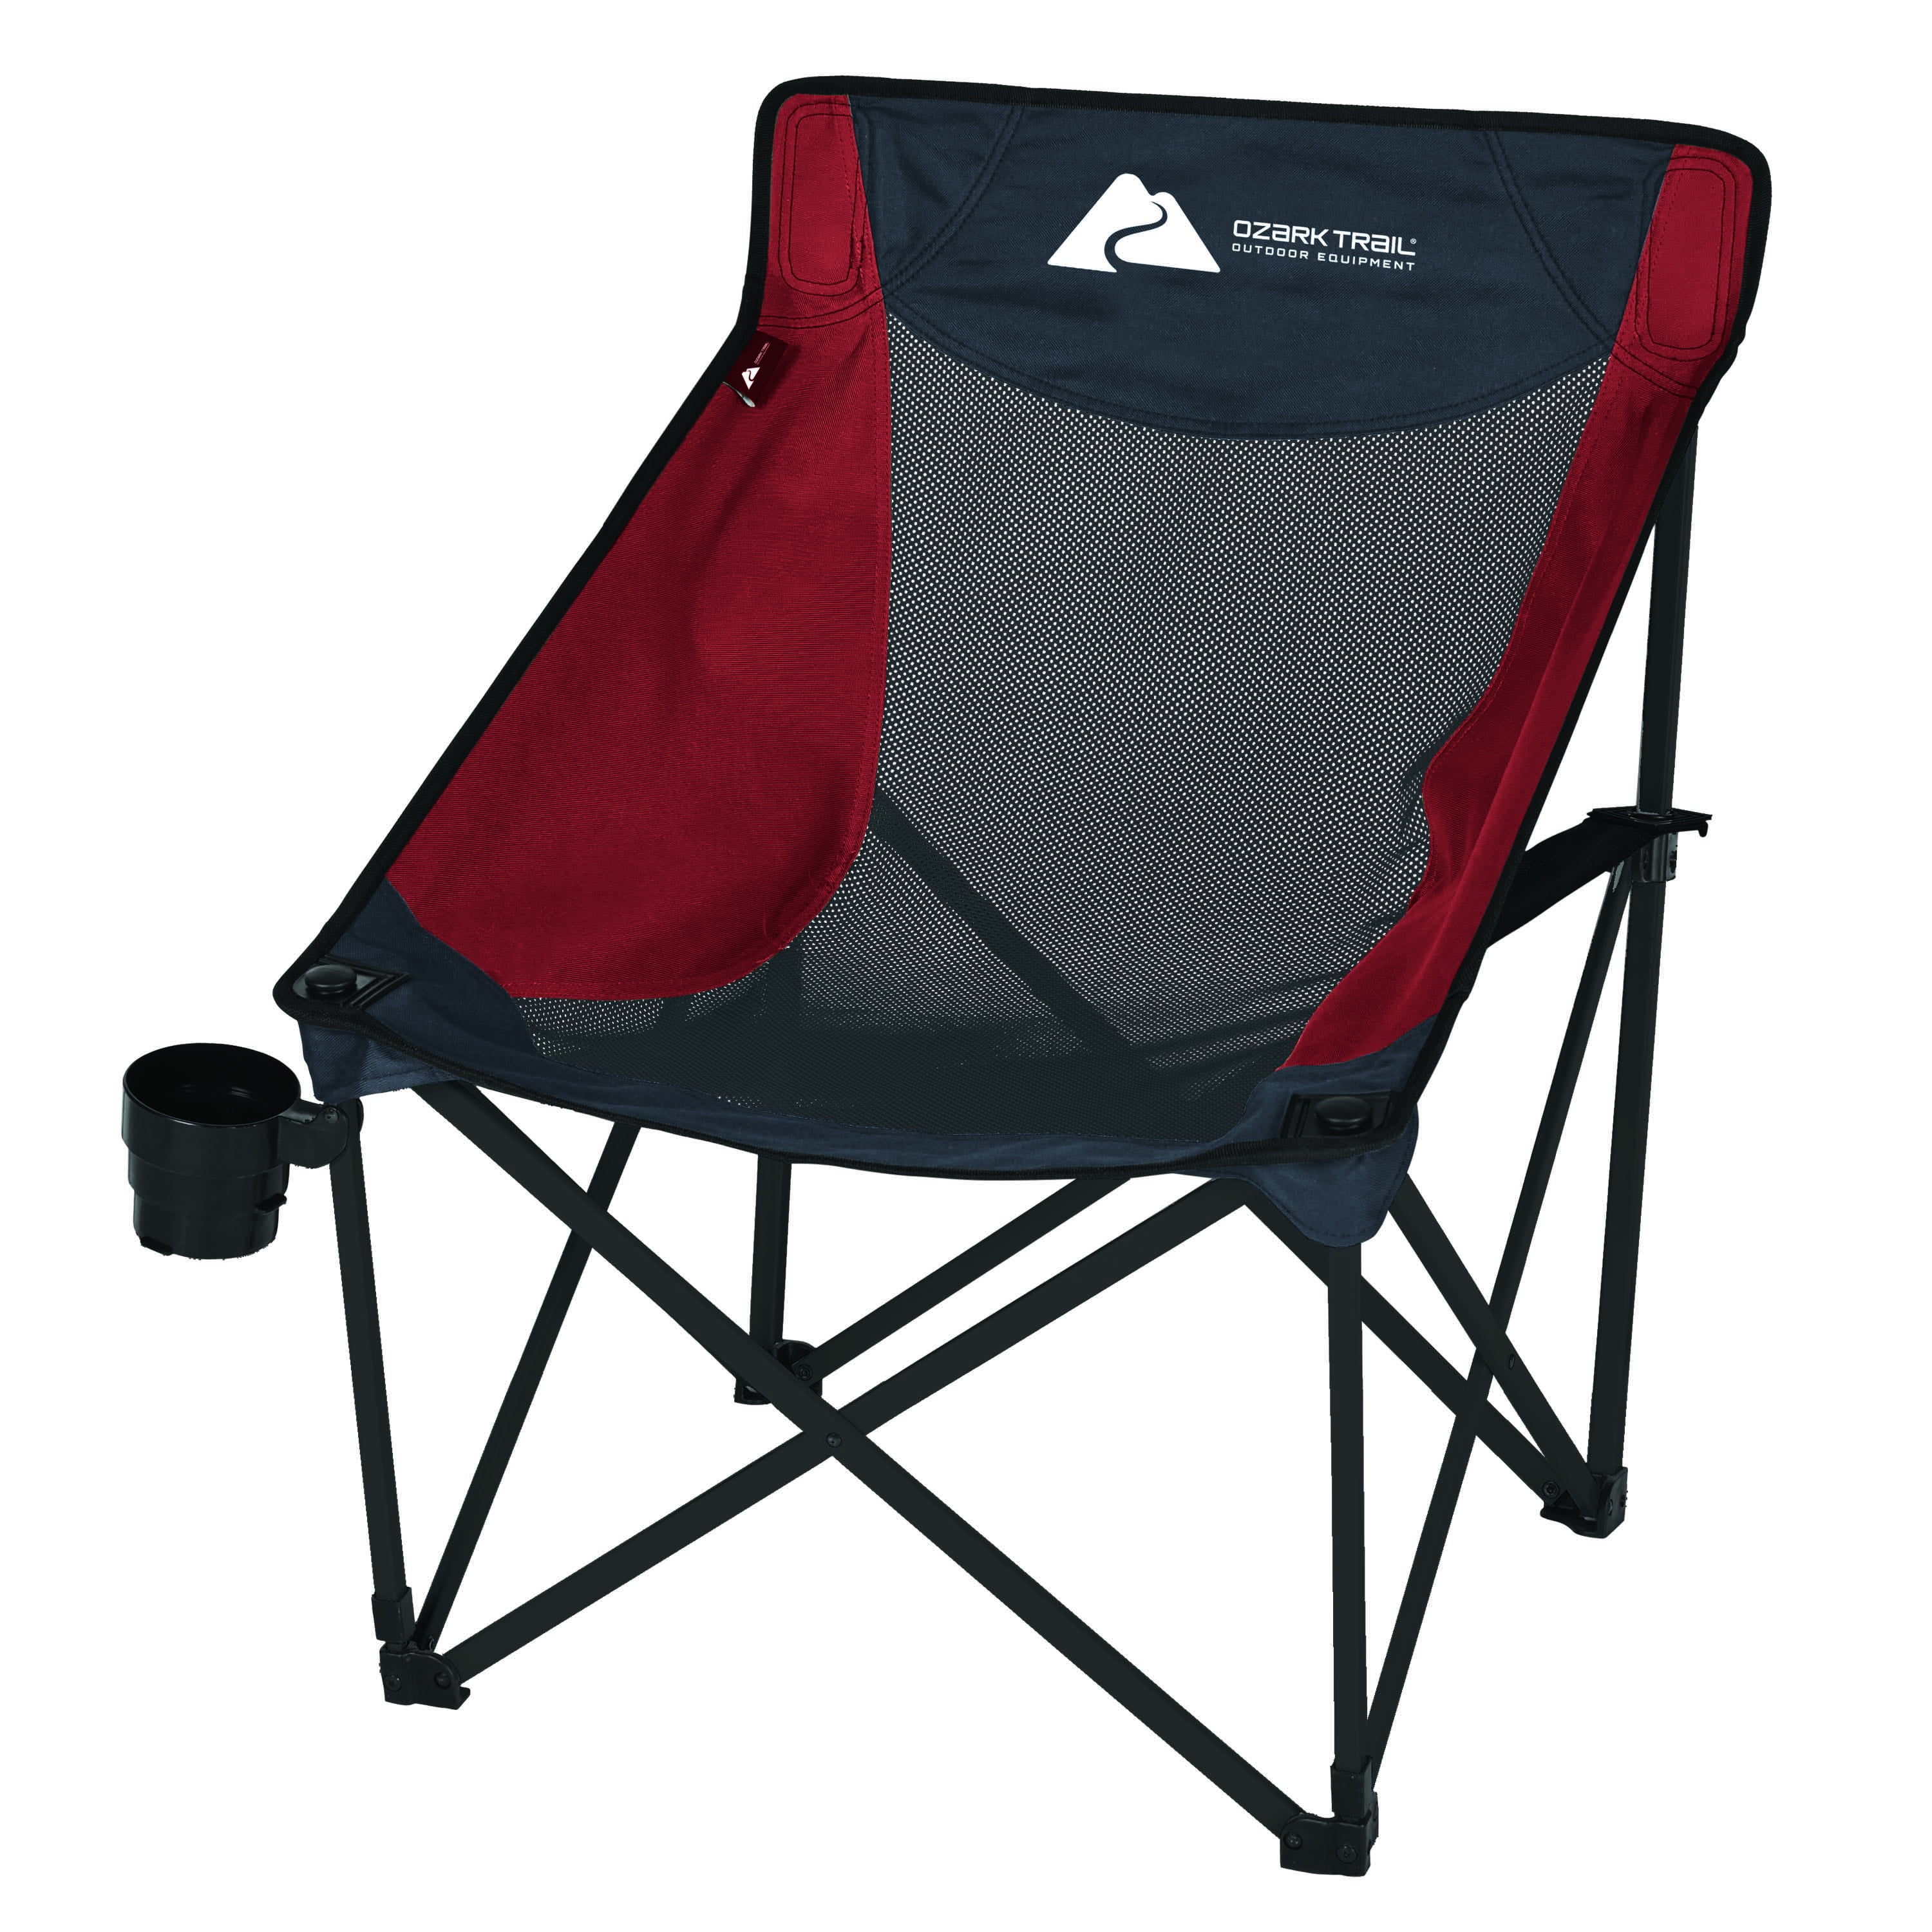 Ozark Trail Compact Mesh Camping Chair for Outdoor